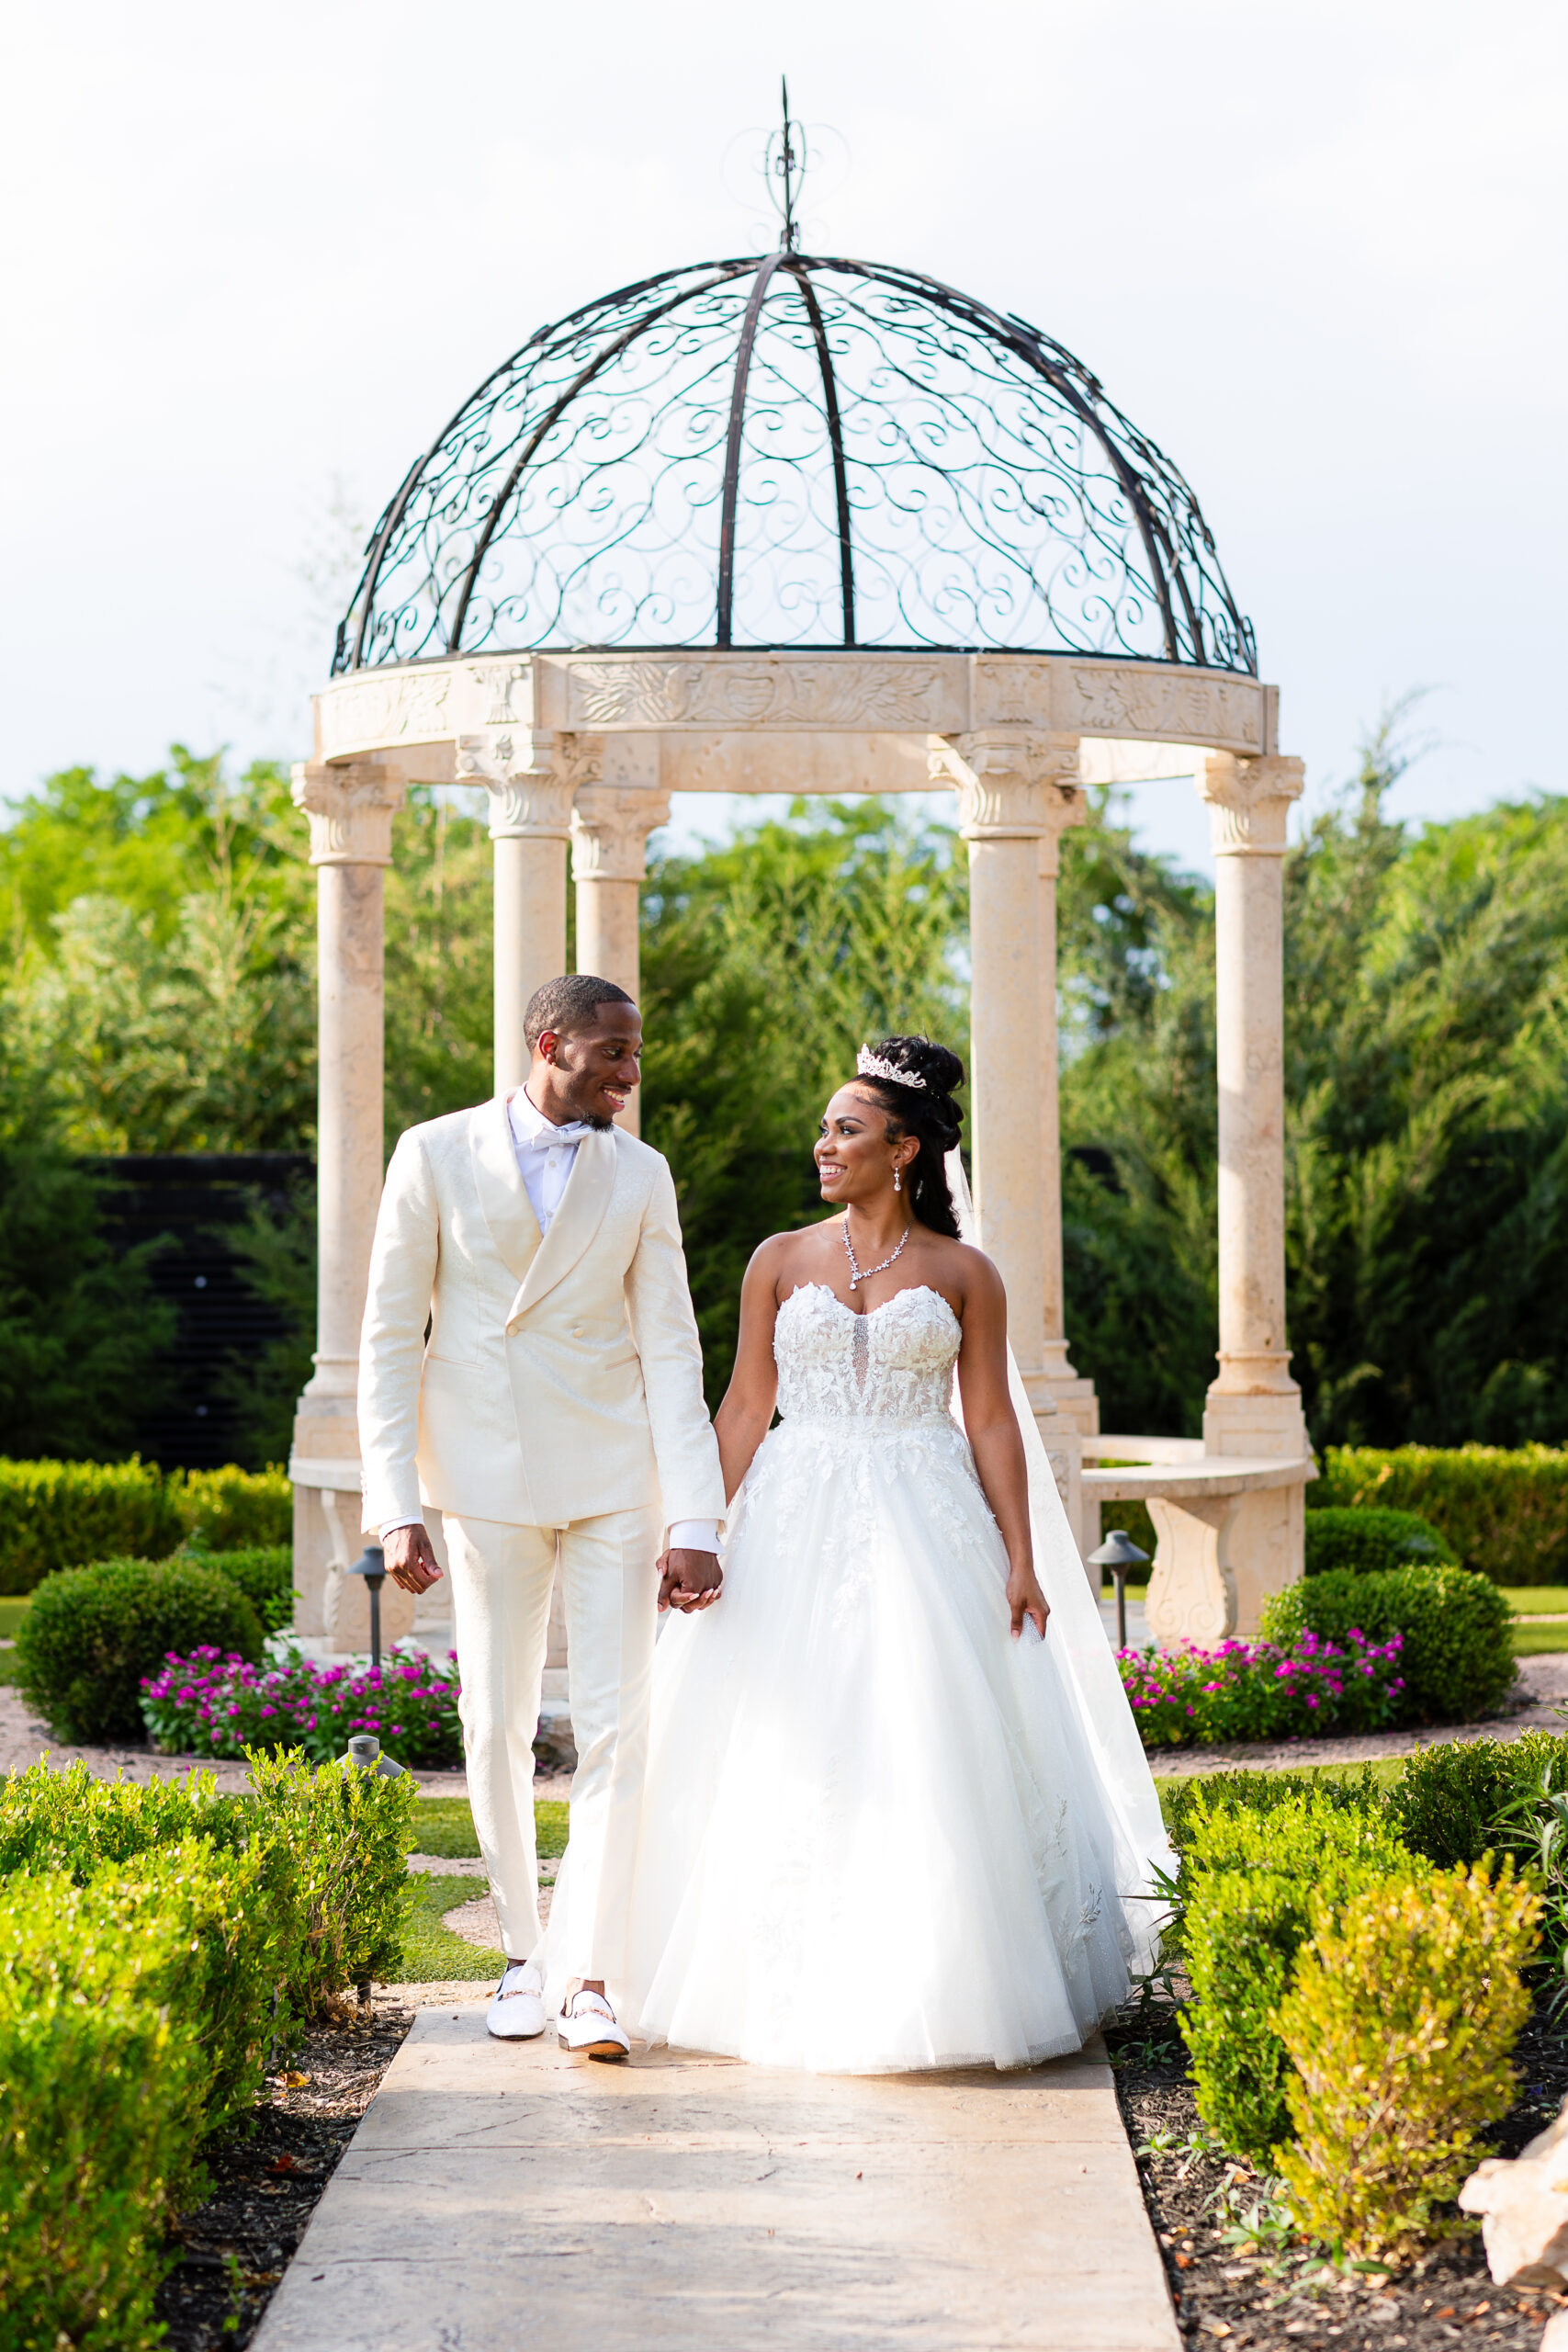 Dallas wedding photographers capture bride and groom holding hands looking at one another